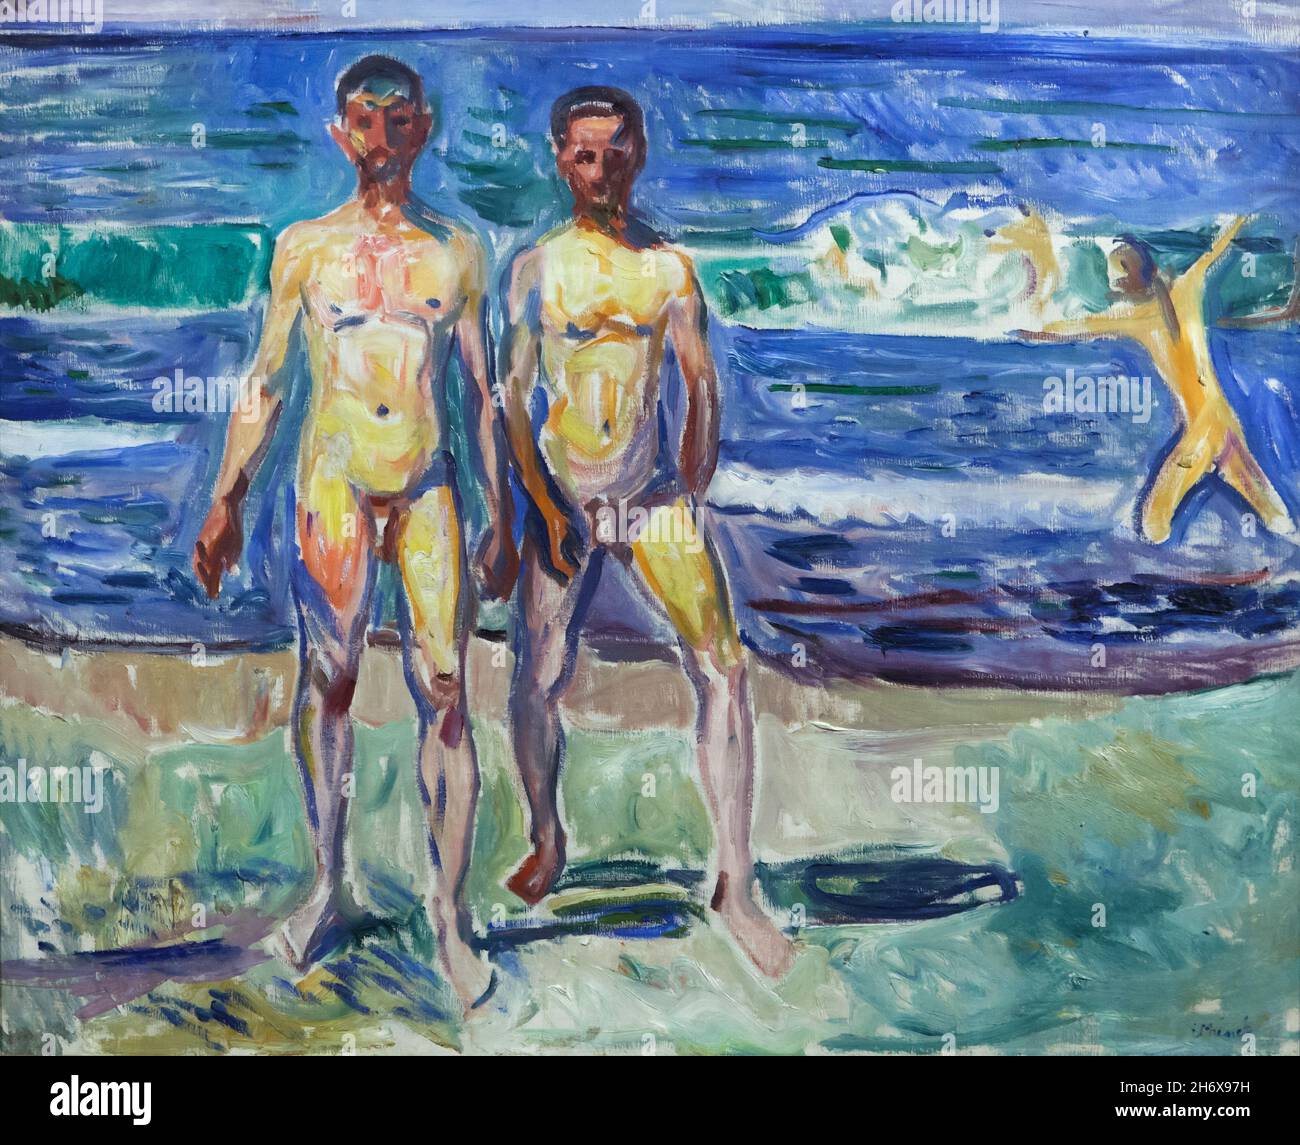 Painting 'Men on the Seashore' by Norwegian expressionist painter Edvard Munch (1908) on display in the Belvedere Museum in Vienna, Austria. Stock Photo